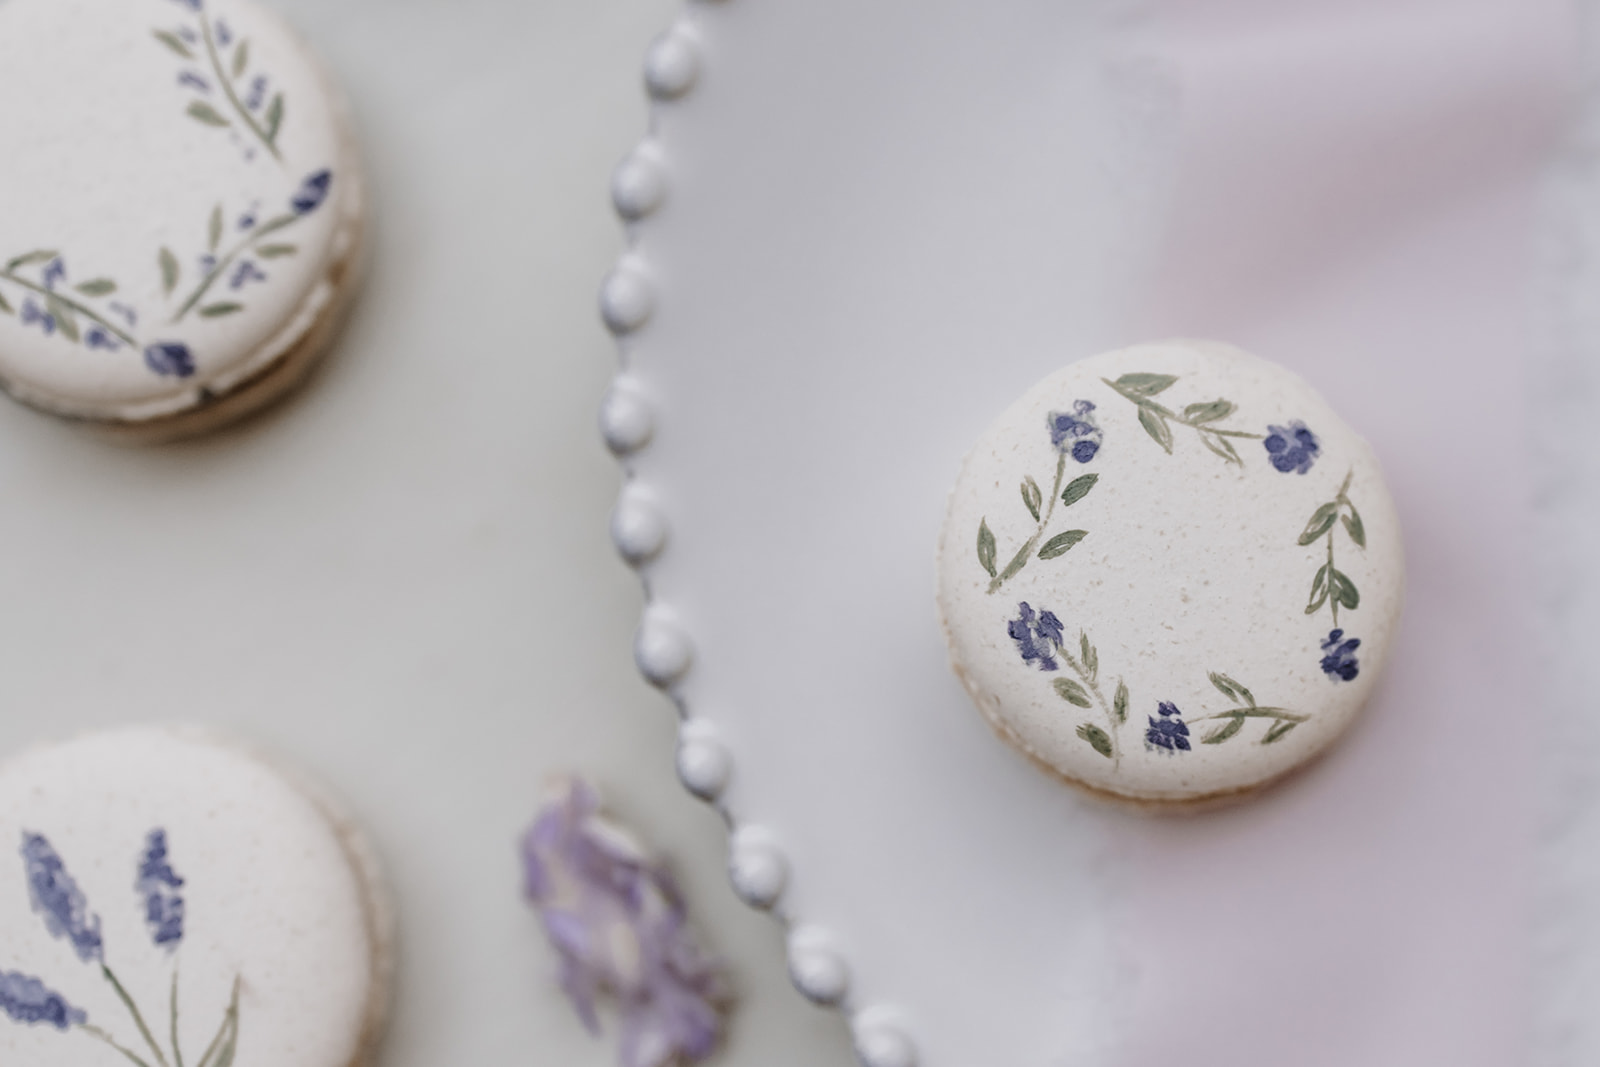 Luxury macaron wedding favors | London and Home Counties Wedding cakes | Louise Hayes Cake Design